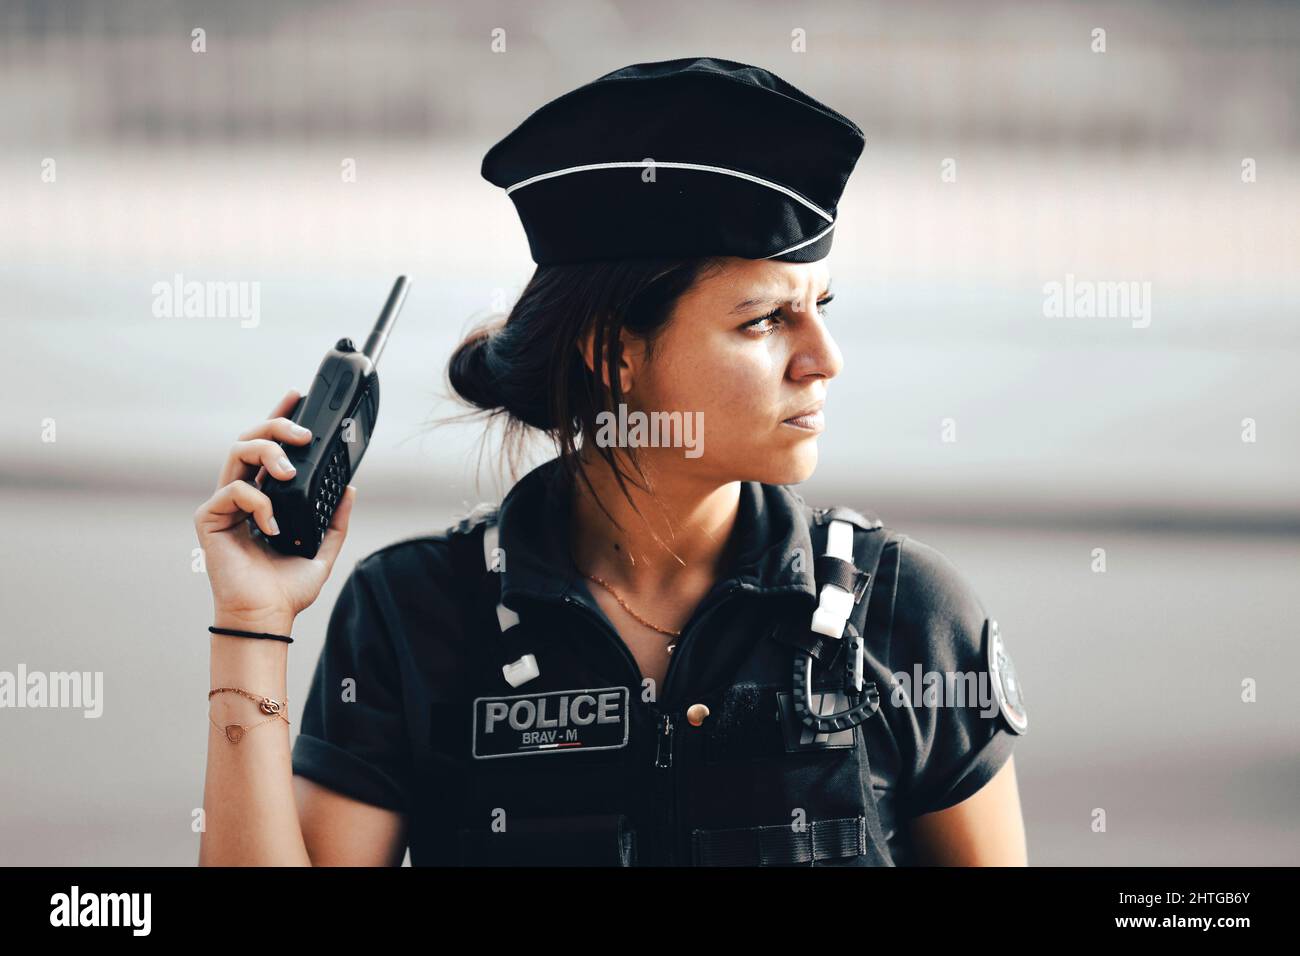 Prescribe Daytime Incompetence A French police woman officer on duty holding a walkie-talkie radio to  communicate in her hand ensures the safety of citizens in a Parisian street  Stock Photo - Alamy